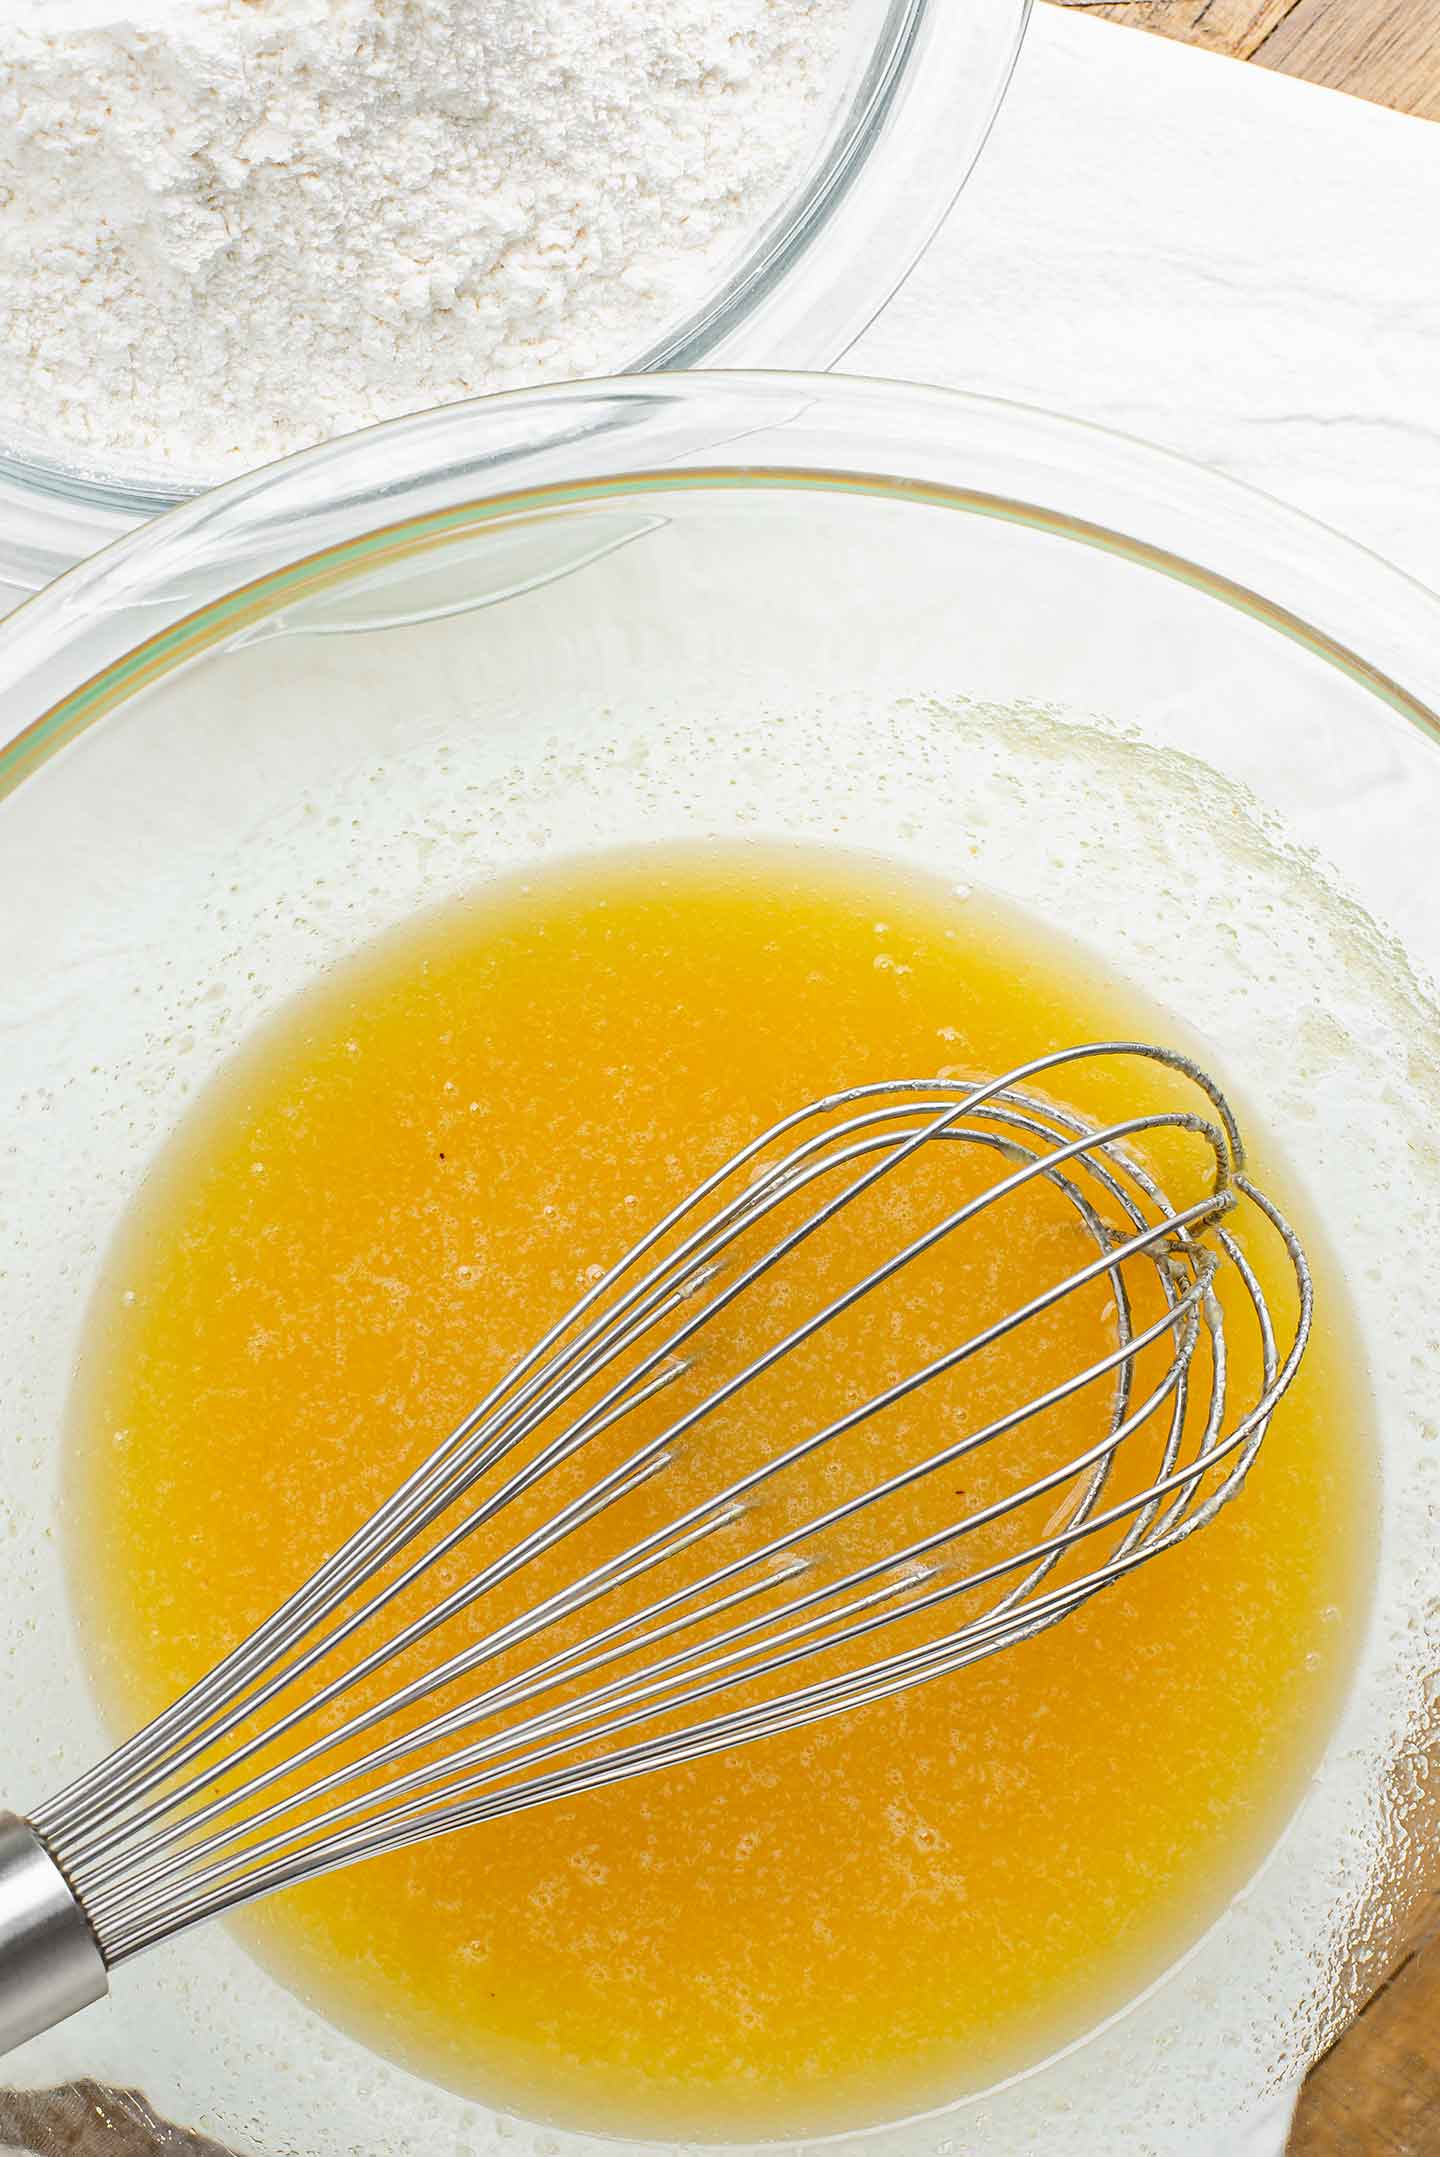 Top down view of a glass bowl with a stirred mixture of applesauce, melted vegan butter, and sugar. A metal whisk rests in the bowl.